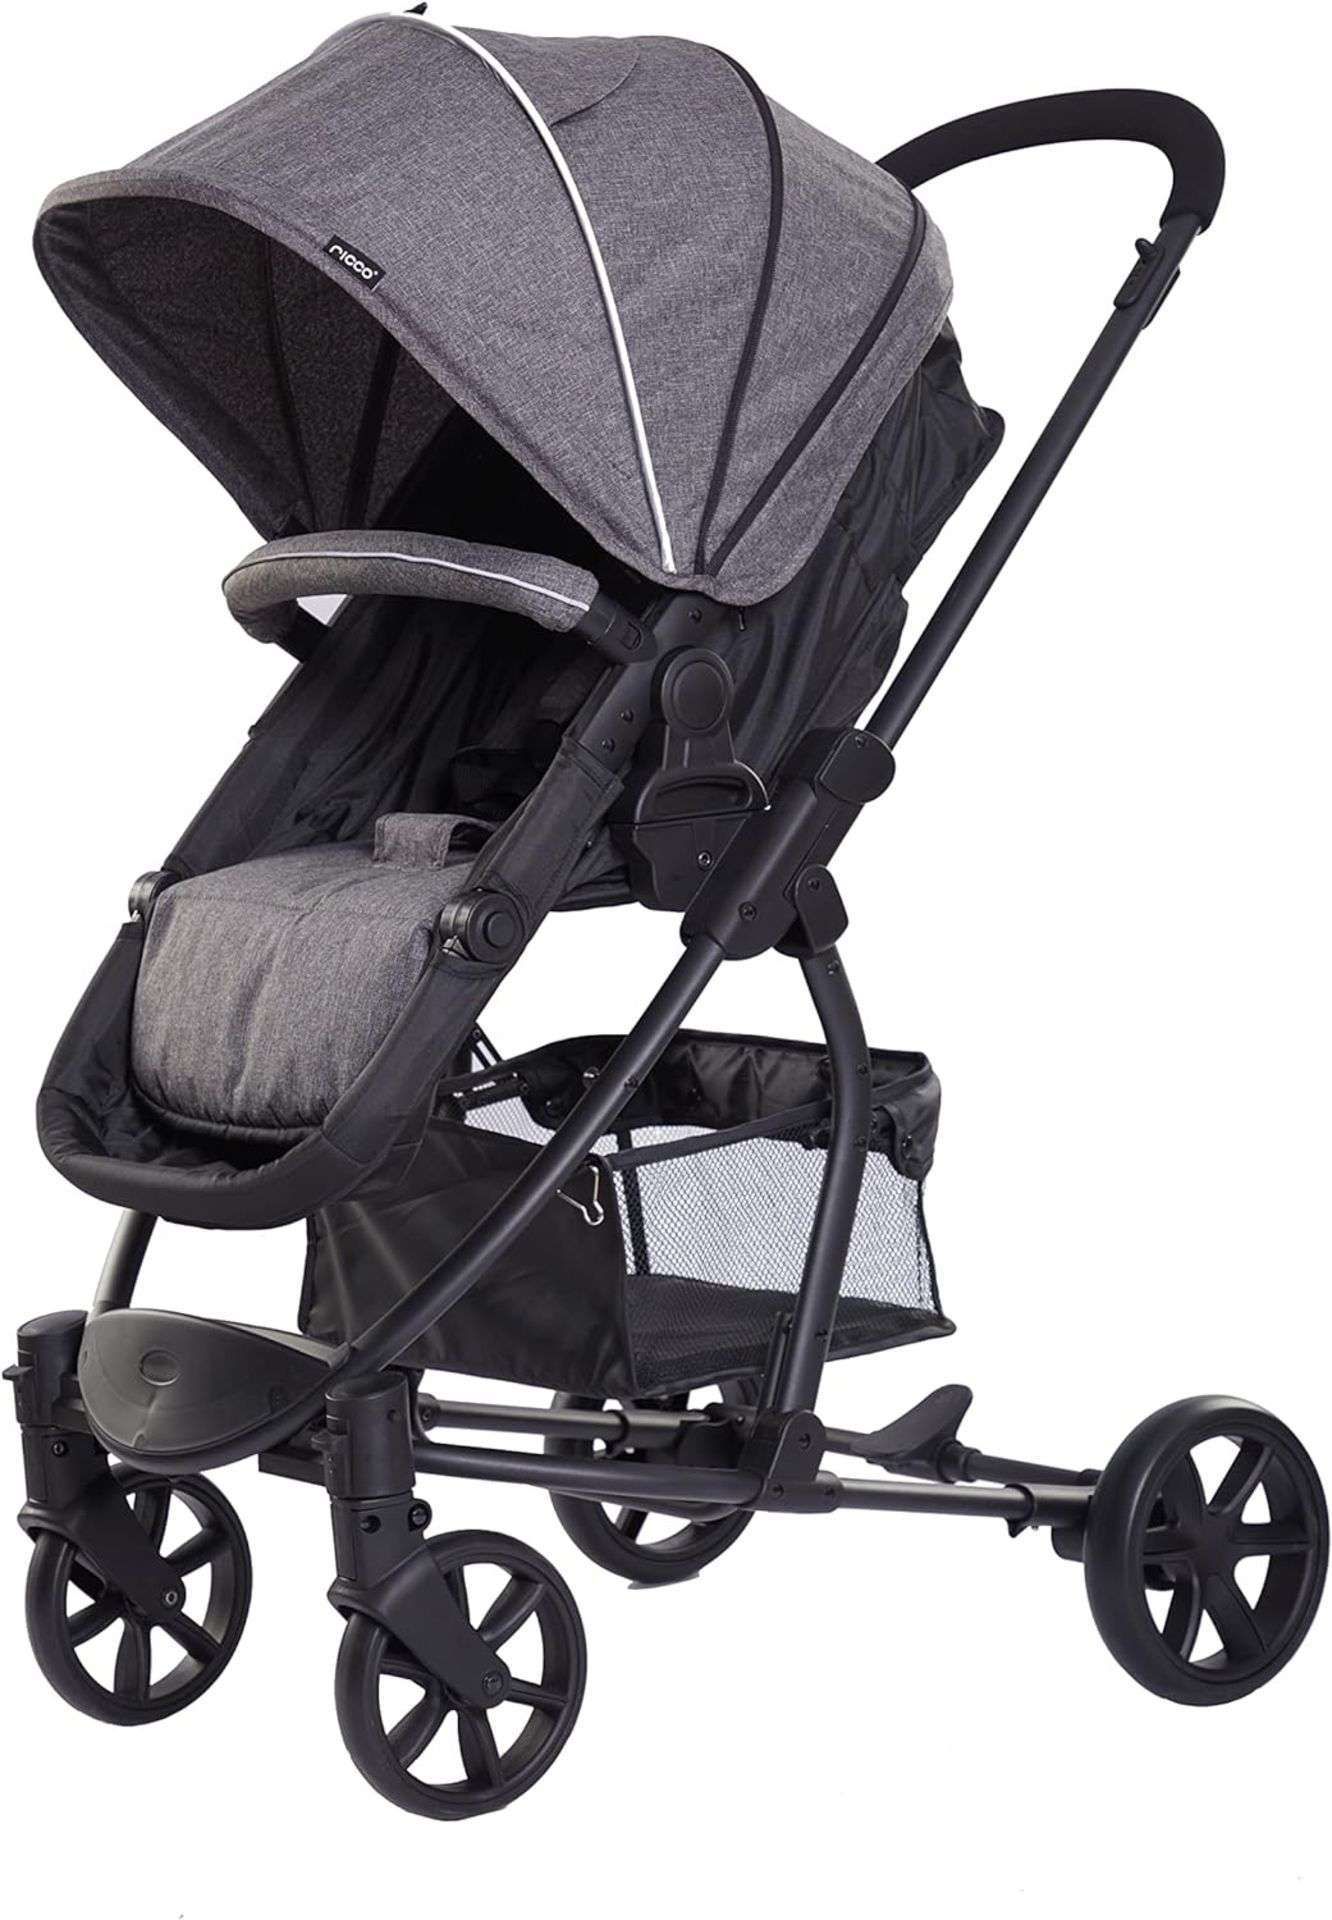 TRADE LOT 5 X BRAND NEW RICCO BABY 2 IN 1 FOLDABLE BUGGY STROLLER PUSHCHAIR GREY R18-7 - Image 2 of 4